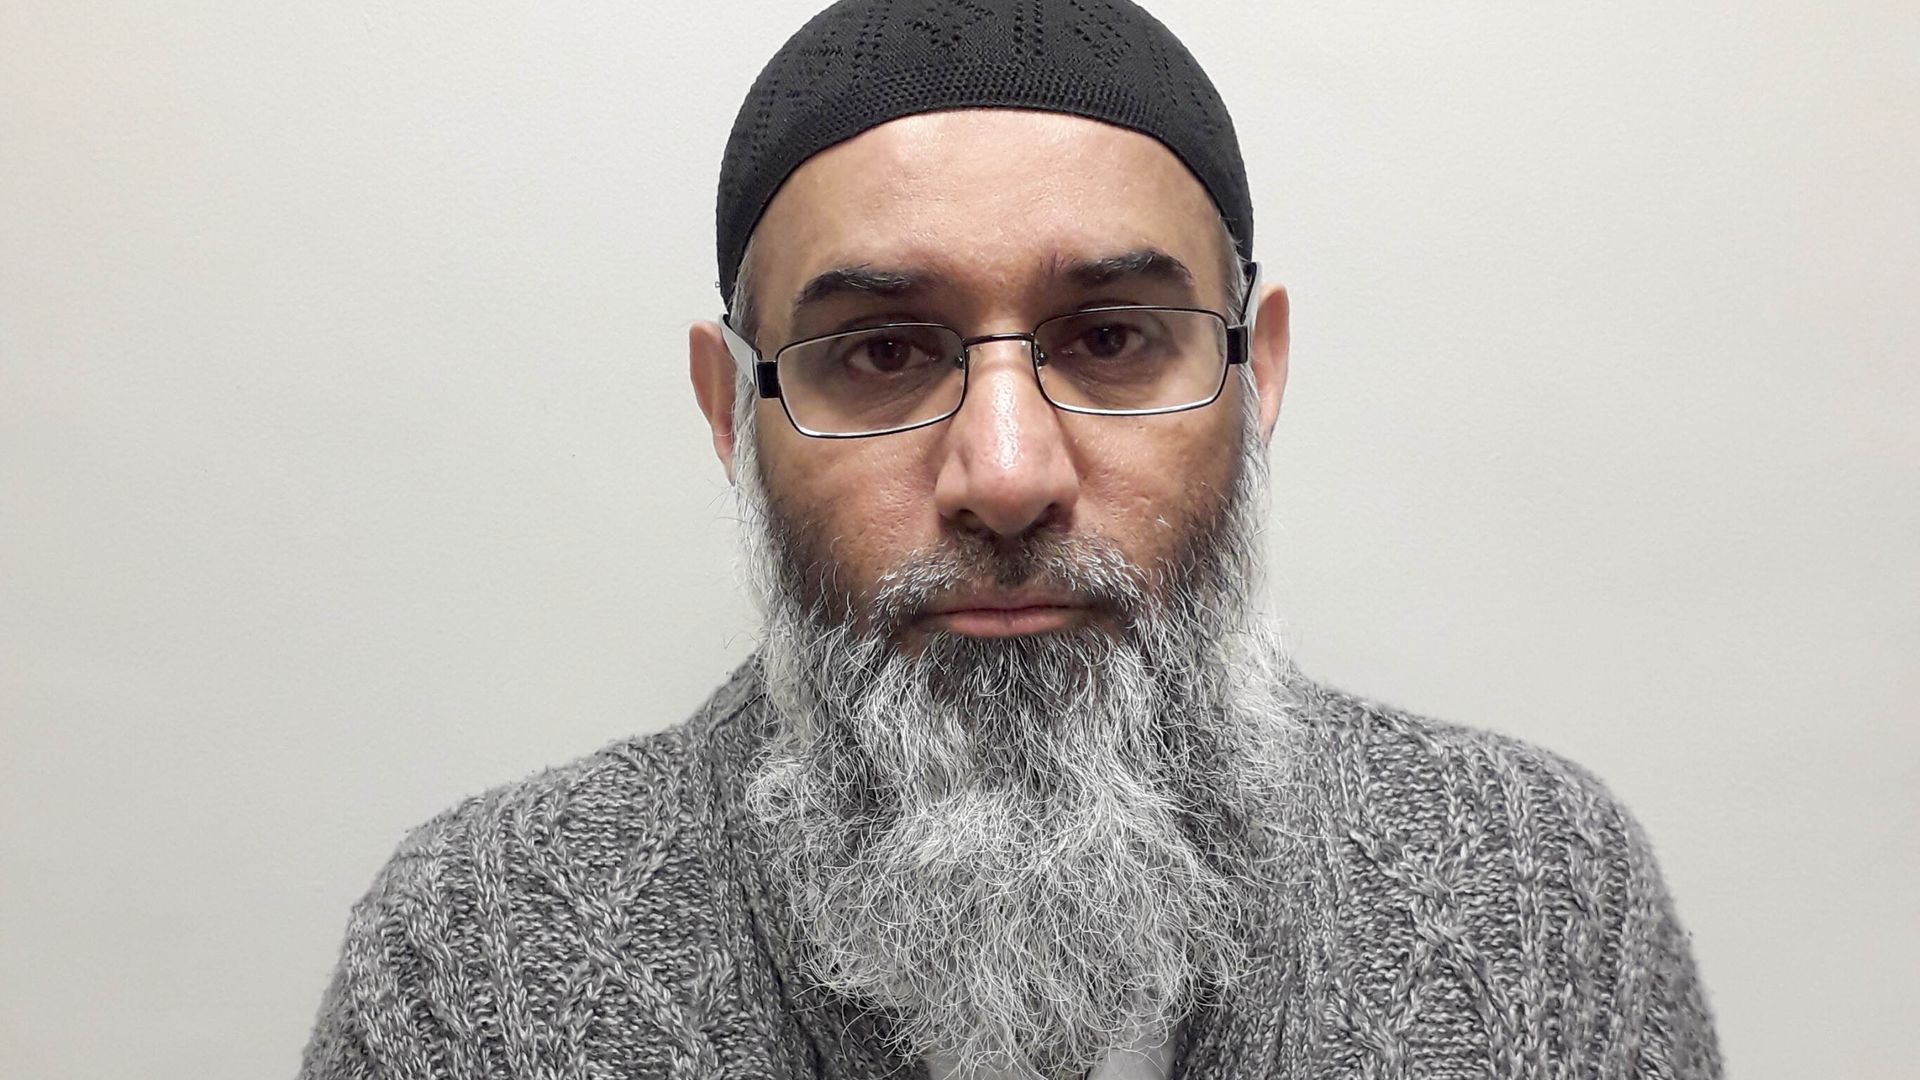 Preacher Anjem Choudary facing life in jail after being found guilty of directing terrorism